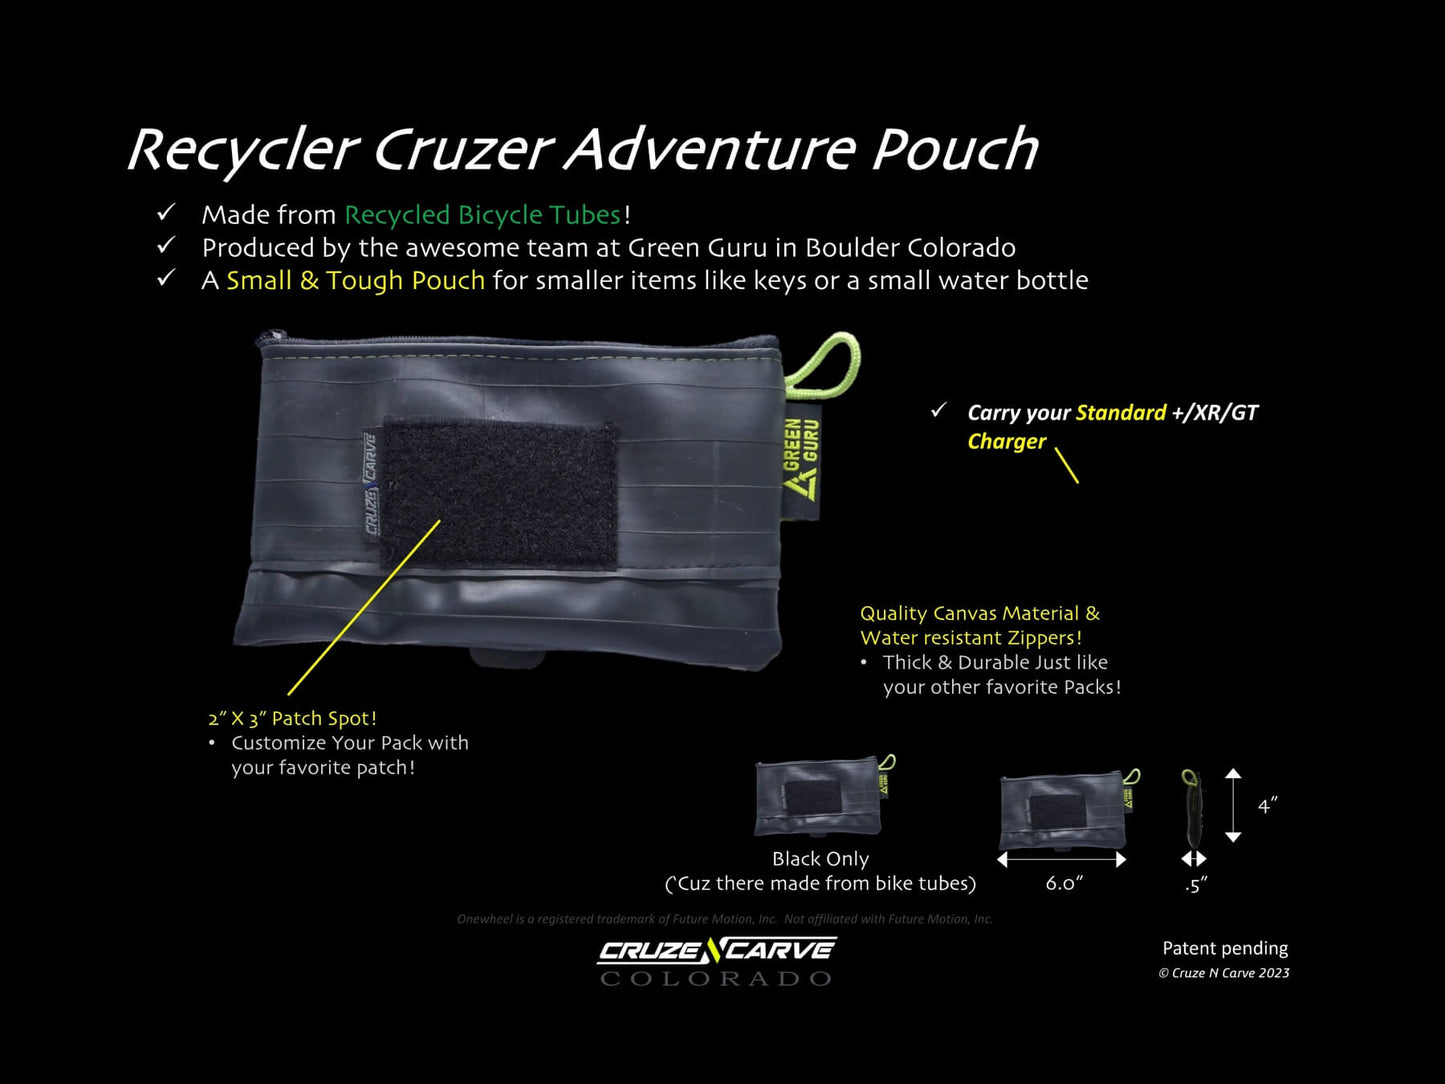 The "Recycler Cruzer" Adventure Pouch Launch Bundle (Onewheel Gt, Onewheel Pint X/XR/+ Compatible)